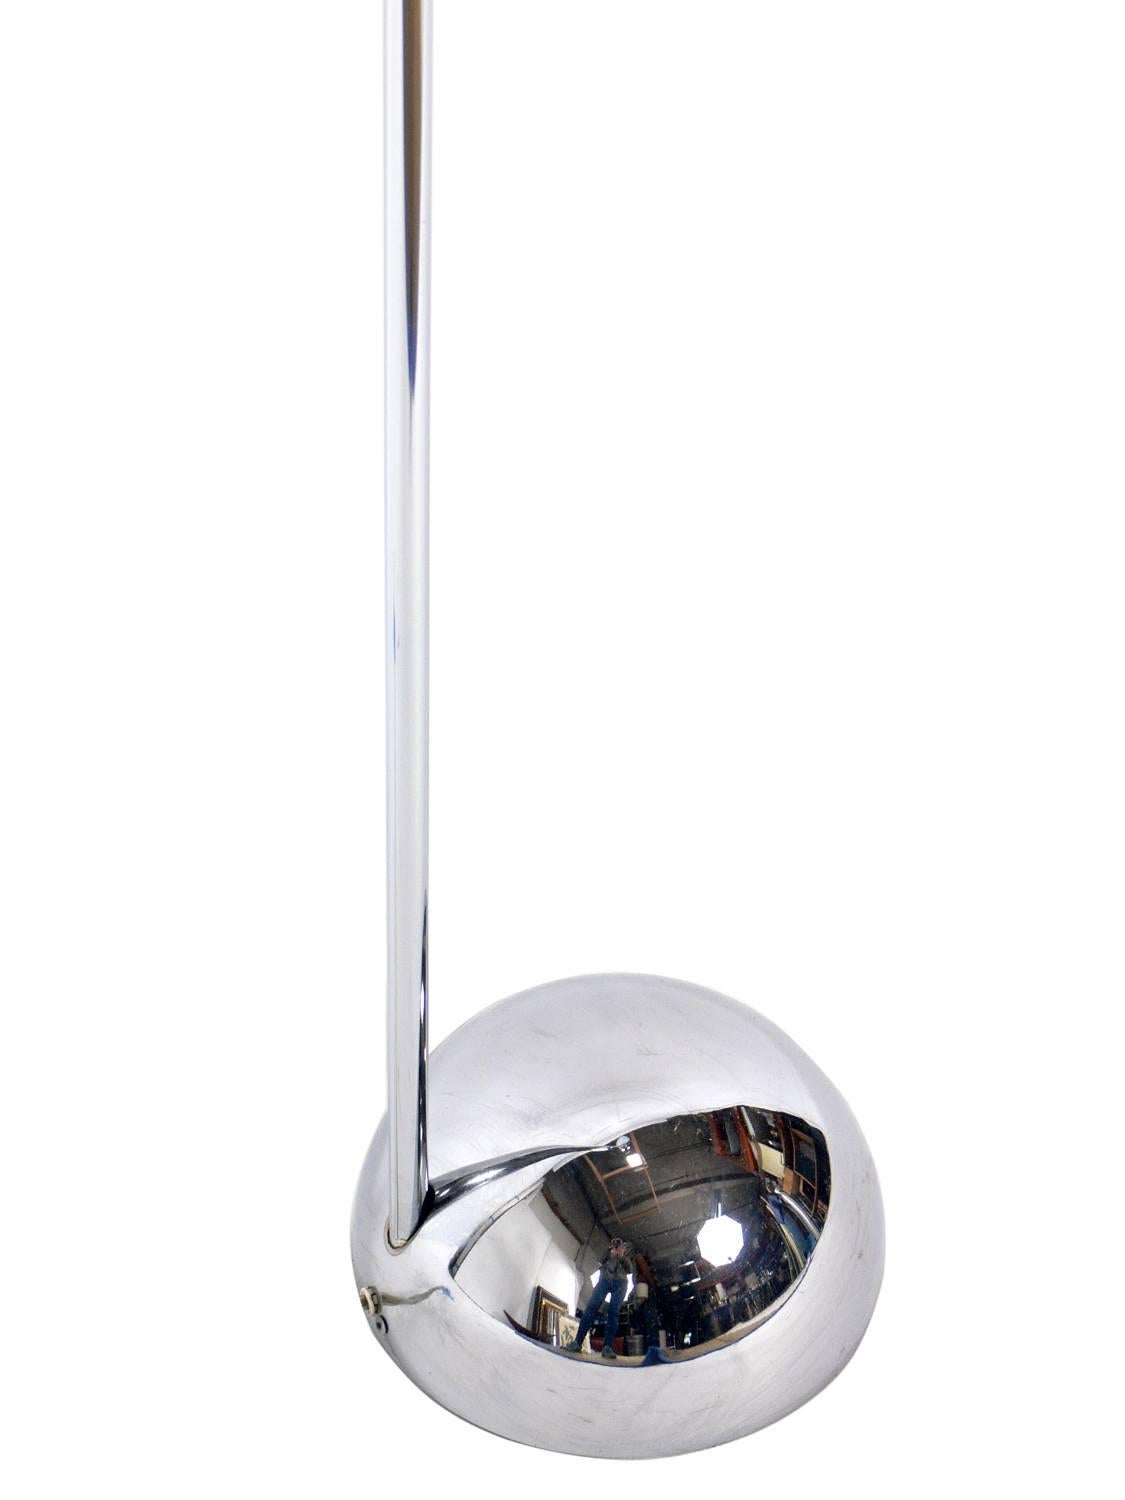 Sleek chrome floor lamp by Robert Sonneman, American, circa 1960s. It has been rewired and is ready to use.